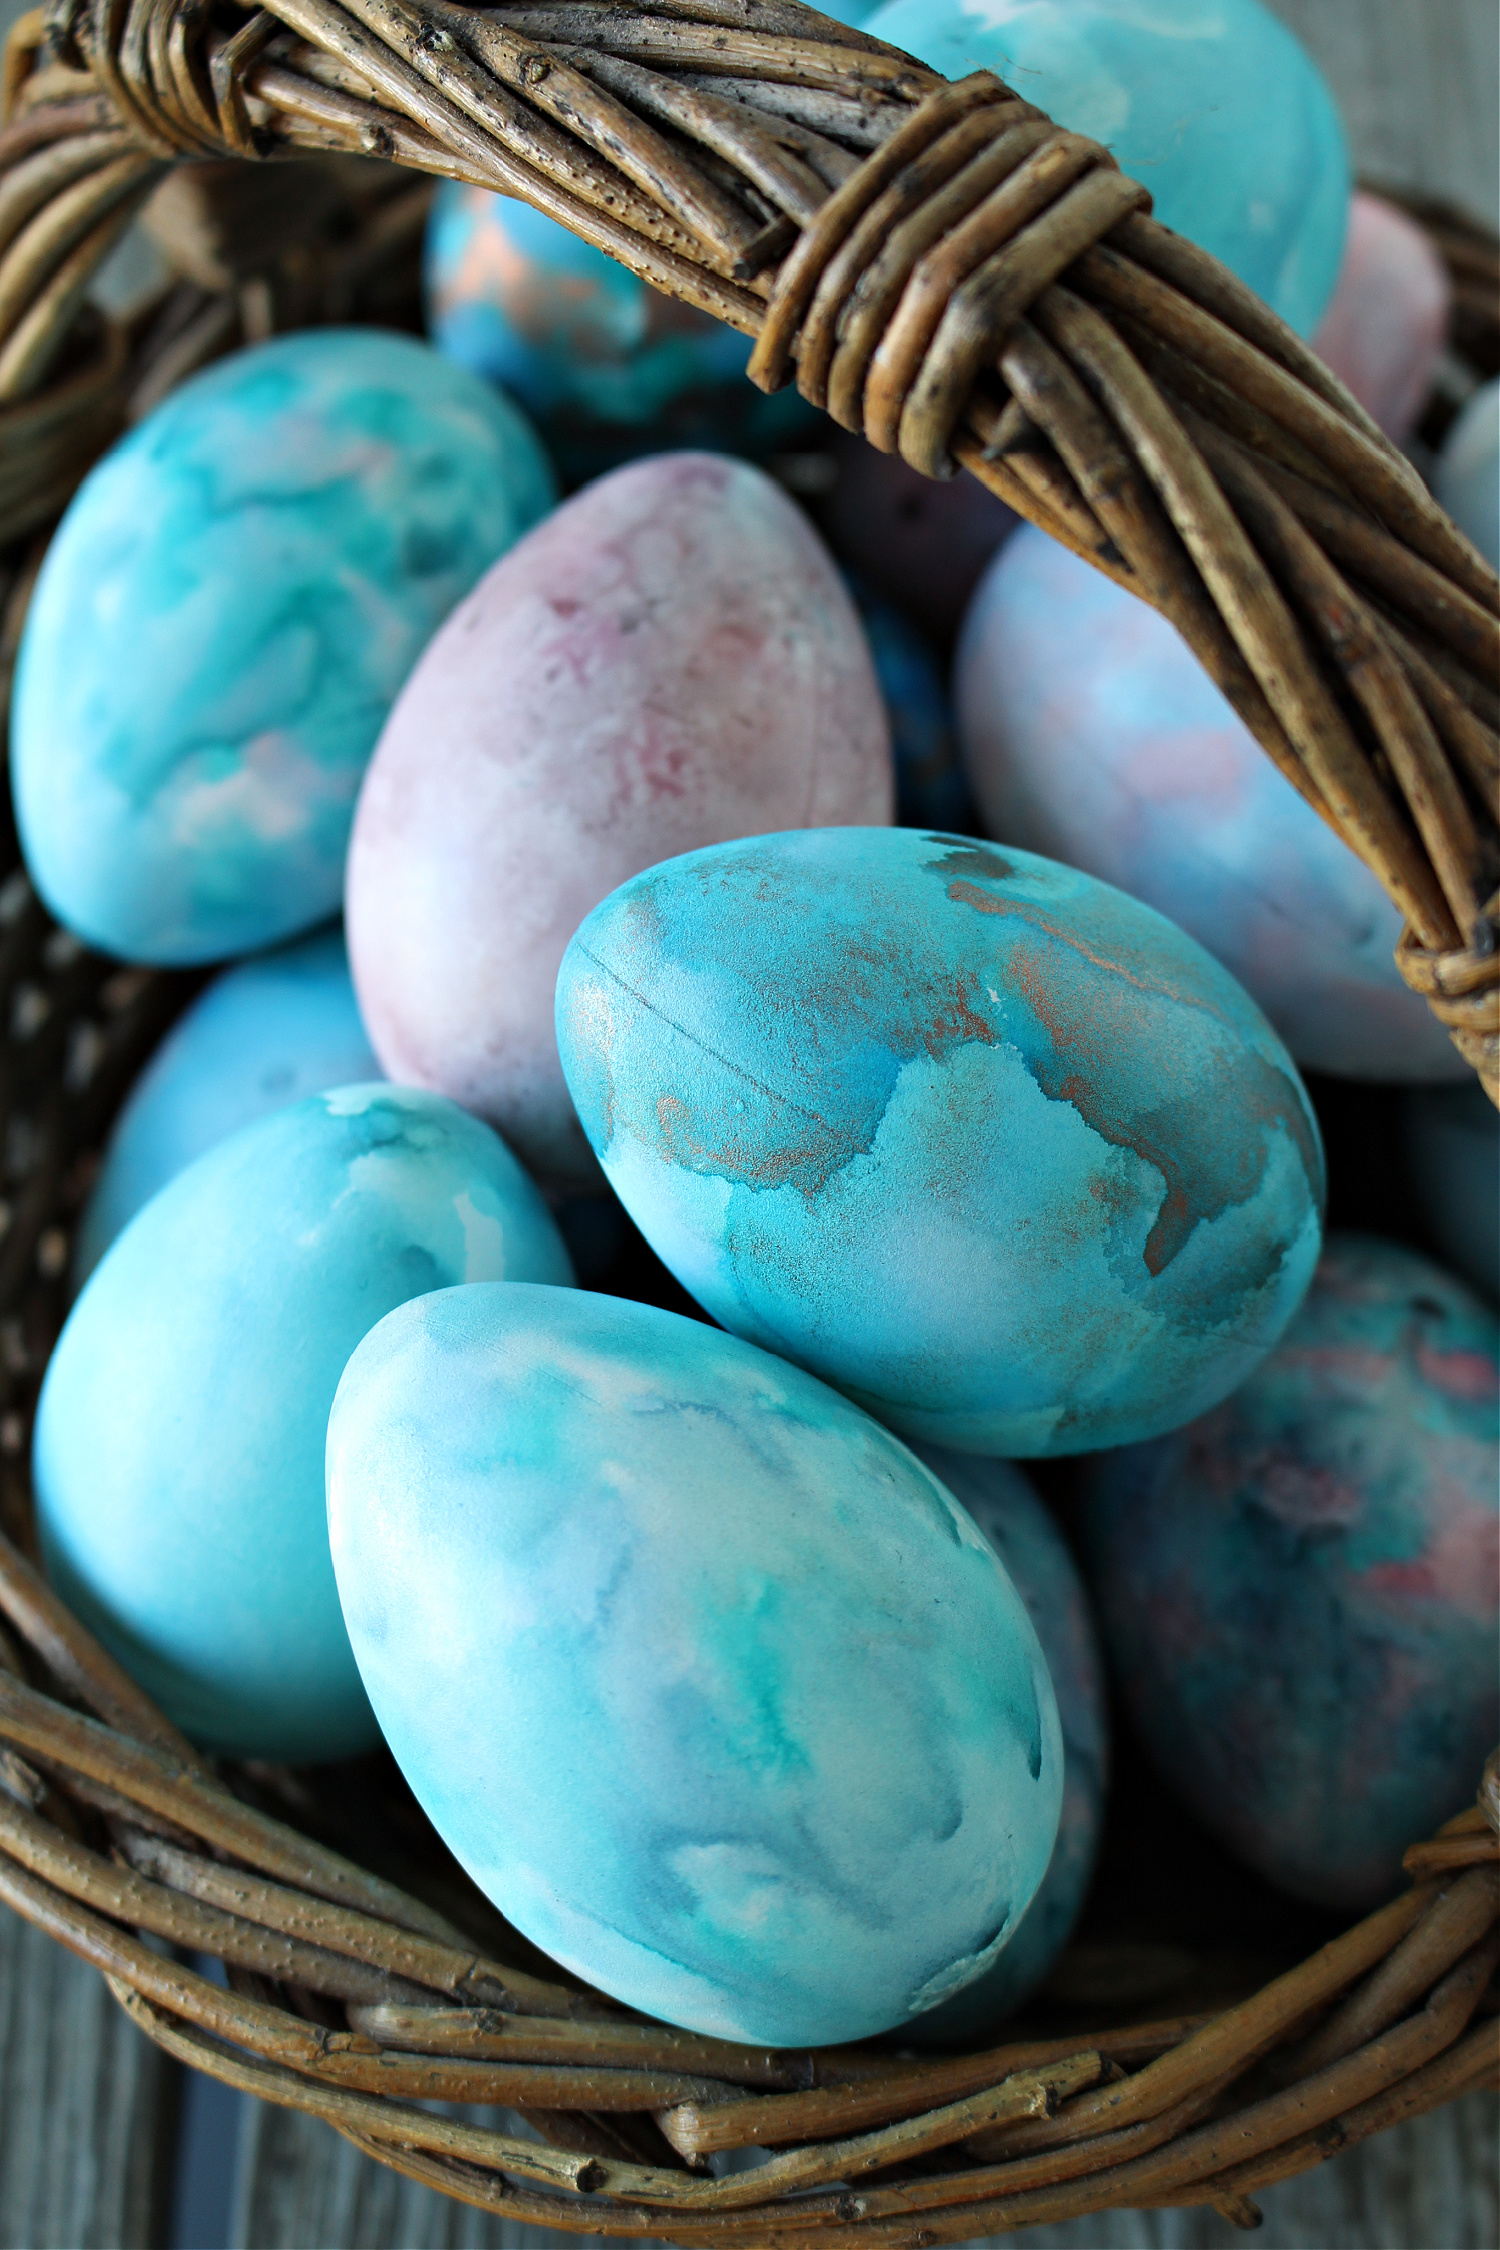 Turquoise Easter egg decorating